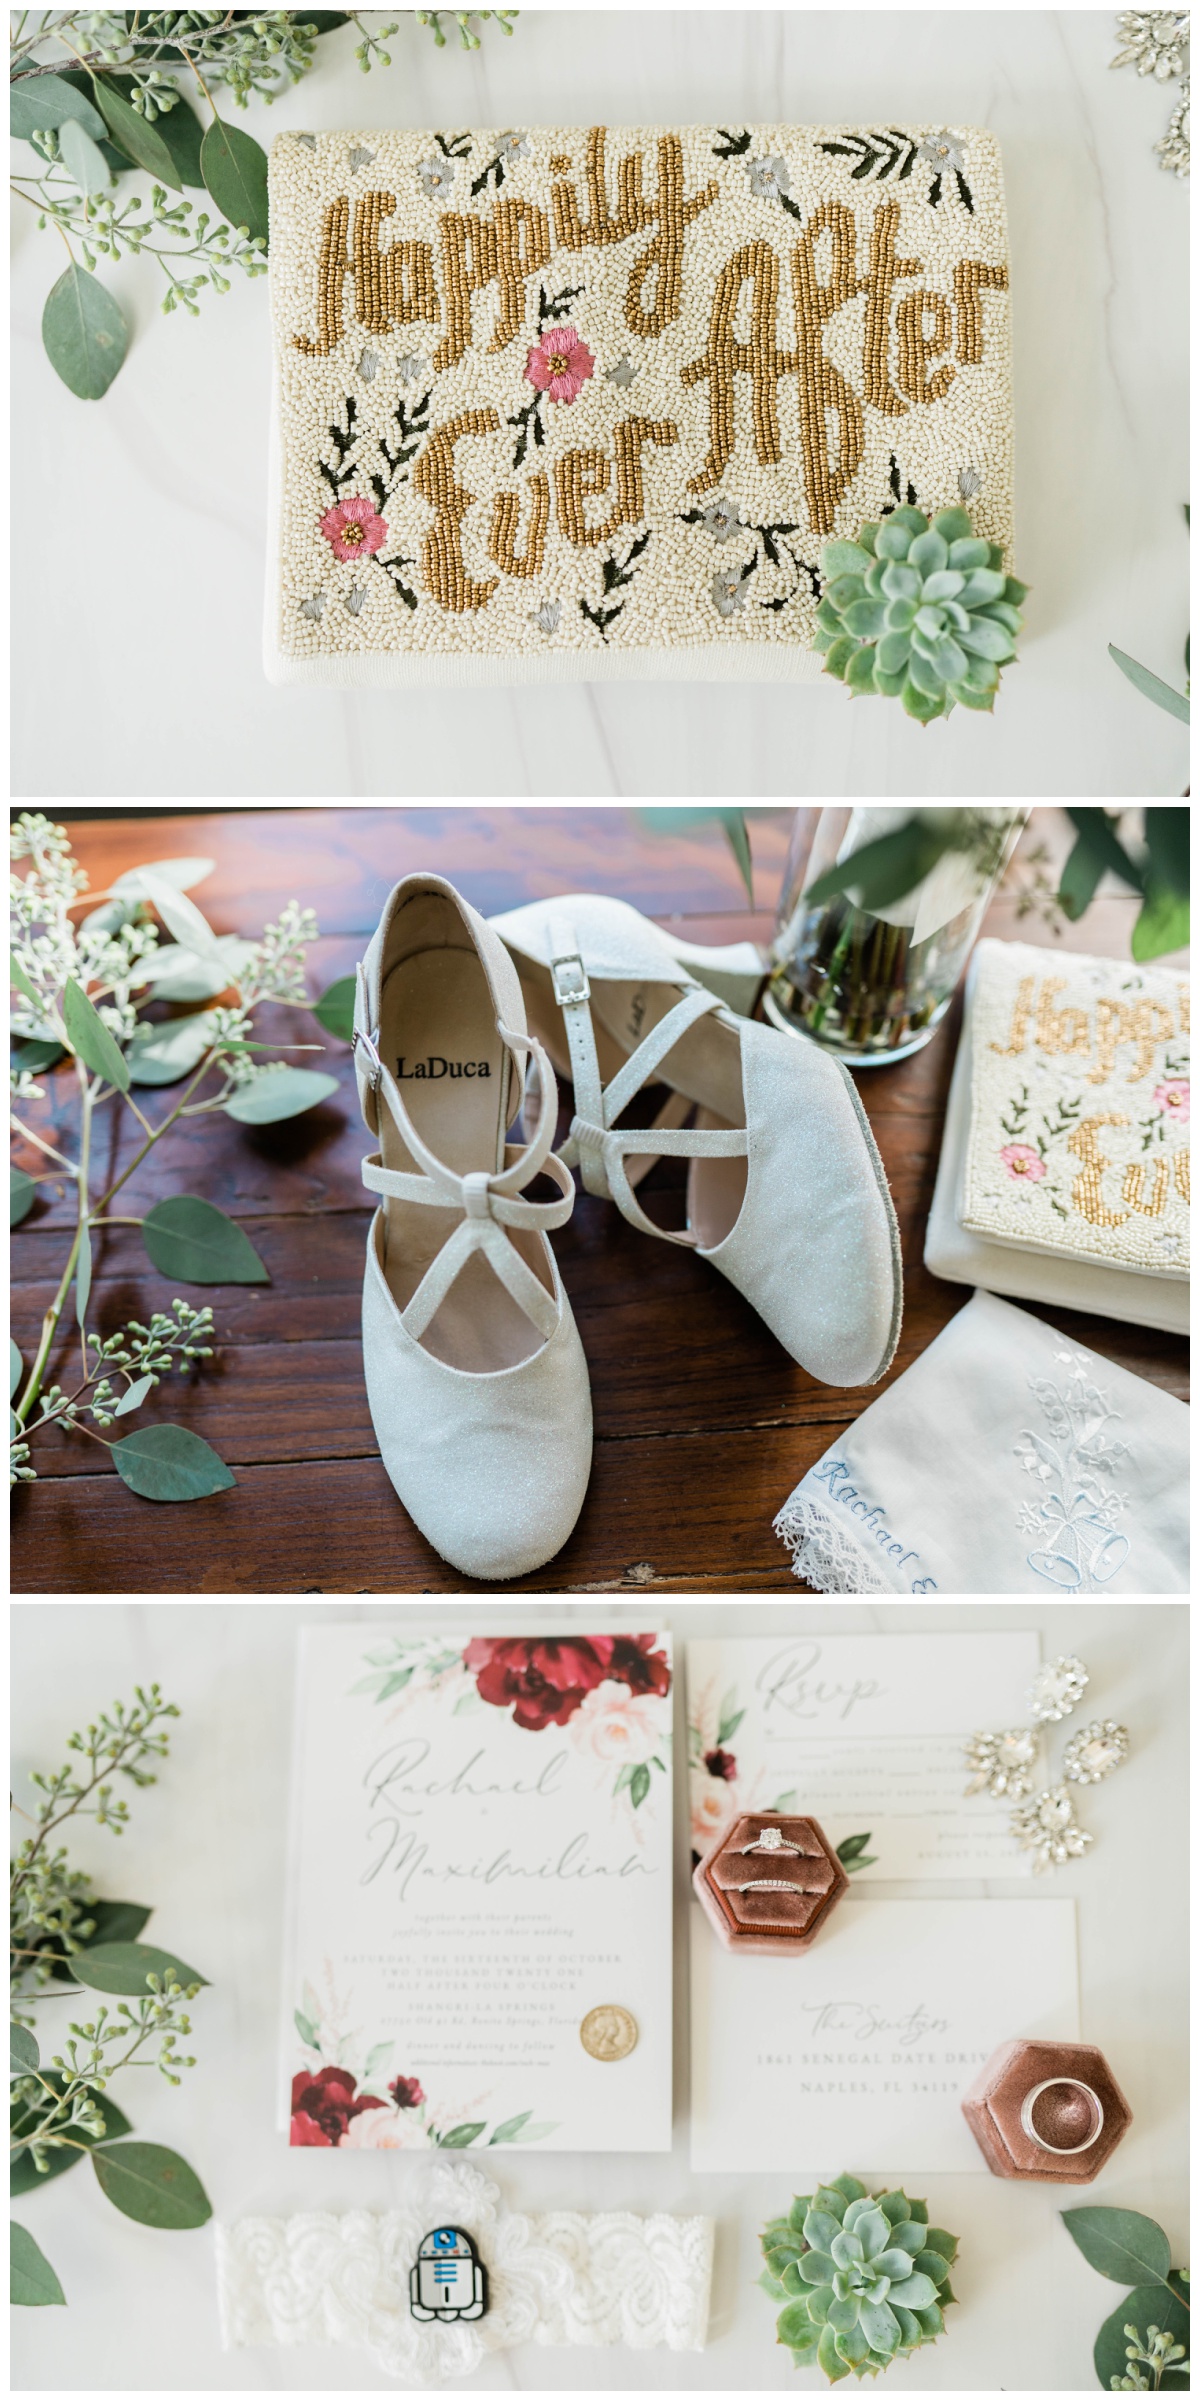 feminine bridal details, La Duca white heels, pink floral wedding invitation suite and Happily Ever After beaded clutch